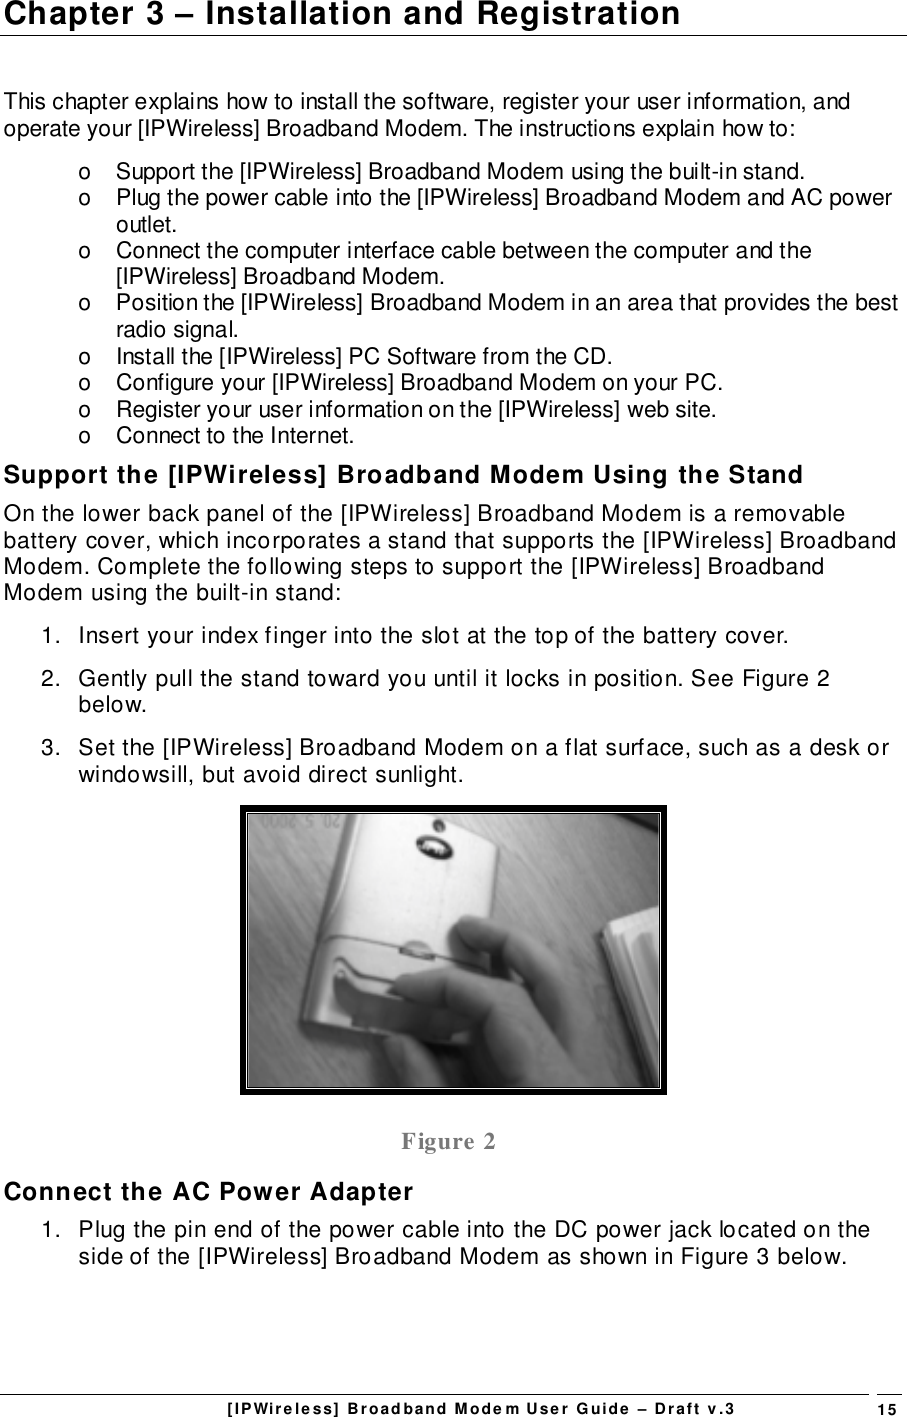 [IPWireless] Broadband Modem User Guide – Draft v.3 15Chapter 3 – Installation and RegistrationThis chapter explains how to install the software, register your user information, andoperate your [IPWireless] Broadband Modem. The instructions explain how to:o  Support the [IPWireless] Broadband Modem using the built-in stand.o  Plug the power cable into the [IPWireless] Broadband Modem and AC poweroutlet.o  Connect the computer interface cable between the computer and the[IPWireless] Broadband Modem.o  Position the [IPWireless] Broadband Modem in an area that provides the bestradio signal.o  Install the [IPWireless] PC Software from the CD.o  Configure your [IPWireless] Broadband Modem on your PC.o  Register your user information on the [IPWireless] web site.o  Connect to the Internet.Support the [IPWireless] Broadband Modem Using the StandOn the lower back panel of the [IPWireless] Broadband Modem is a removablebattery cover, which incorporates a stand that supports the [IPWireless] BroadbandModem. Complete the following steps to support the [IPWireless] BroadbandModem using the built-in stand:1.  Insert your index finger into the slot at the top of the battery cover.2.  Gently pull the stand toward you until it locks in position. See Figure 2below.3.  Set the [IPWireless] Broadband Modem on a flat surface, such as a desk orwindowsill, but avoid direct sunlight.Figure 2Connect the AC Power Adapter1.  Plug the pin end of the power cable into the DC power jack located on theside of the [IPWireless] Broadband Modem as shown in Figure 3 below.